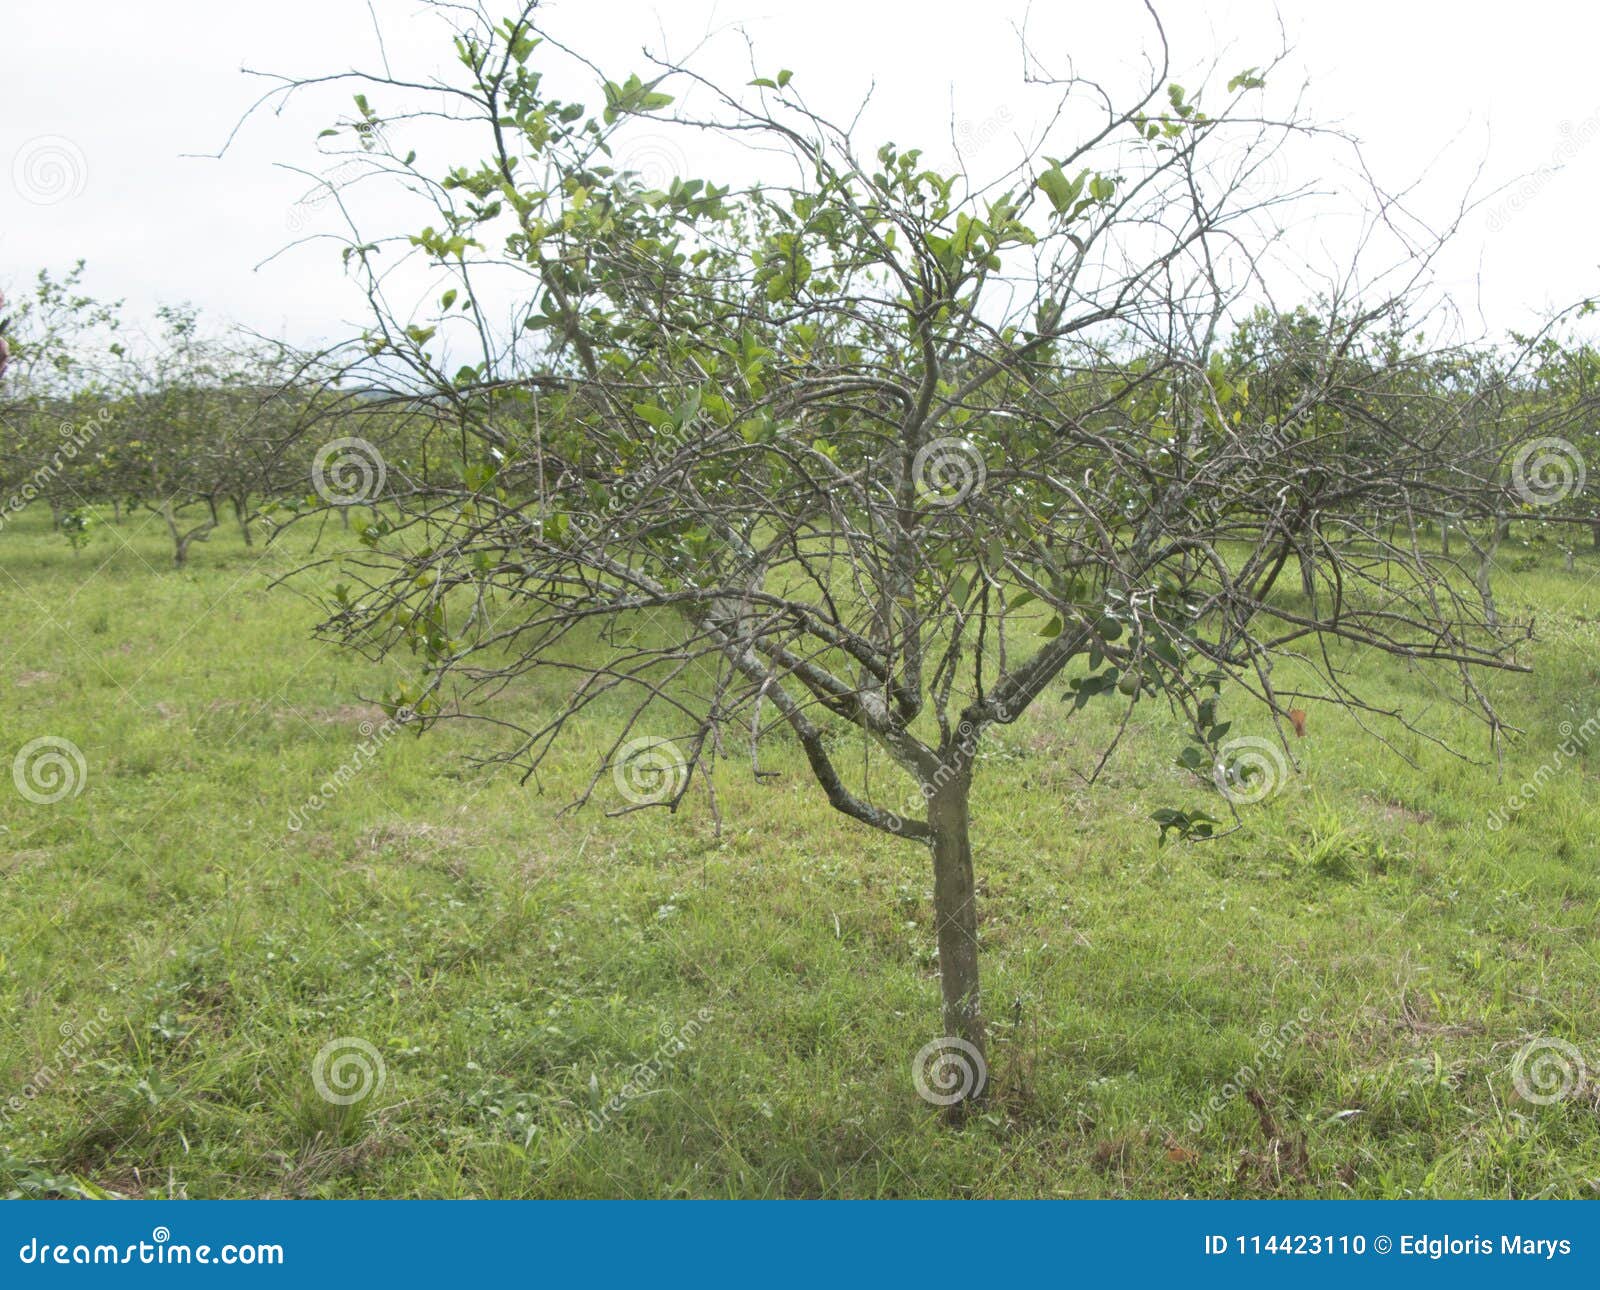 citrus greening hlb huanglongbing yellow dragon diseased leaves and fruits